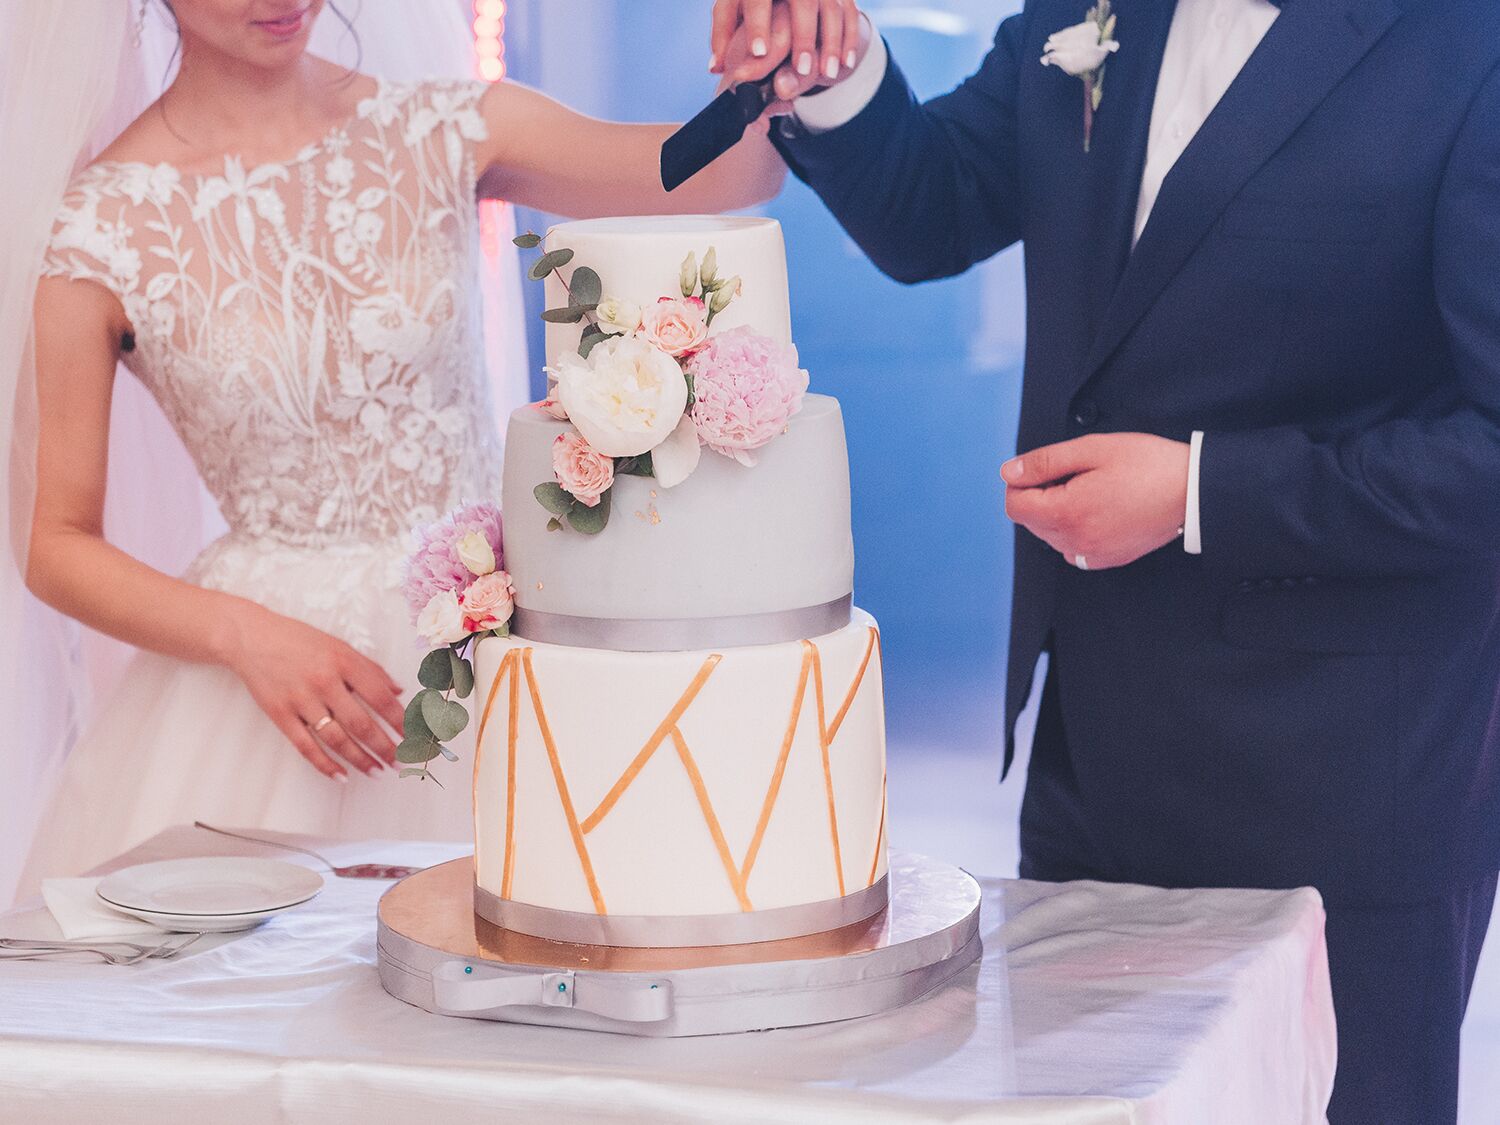 Couples Cut a Cake on wedding day